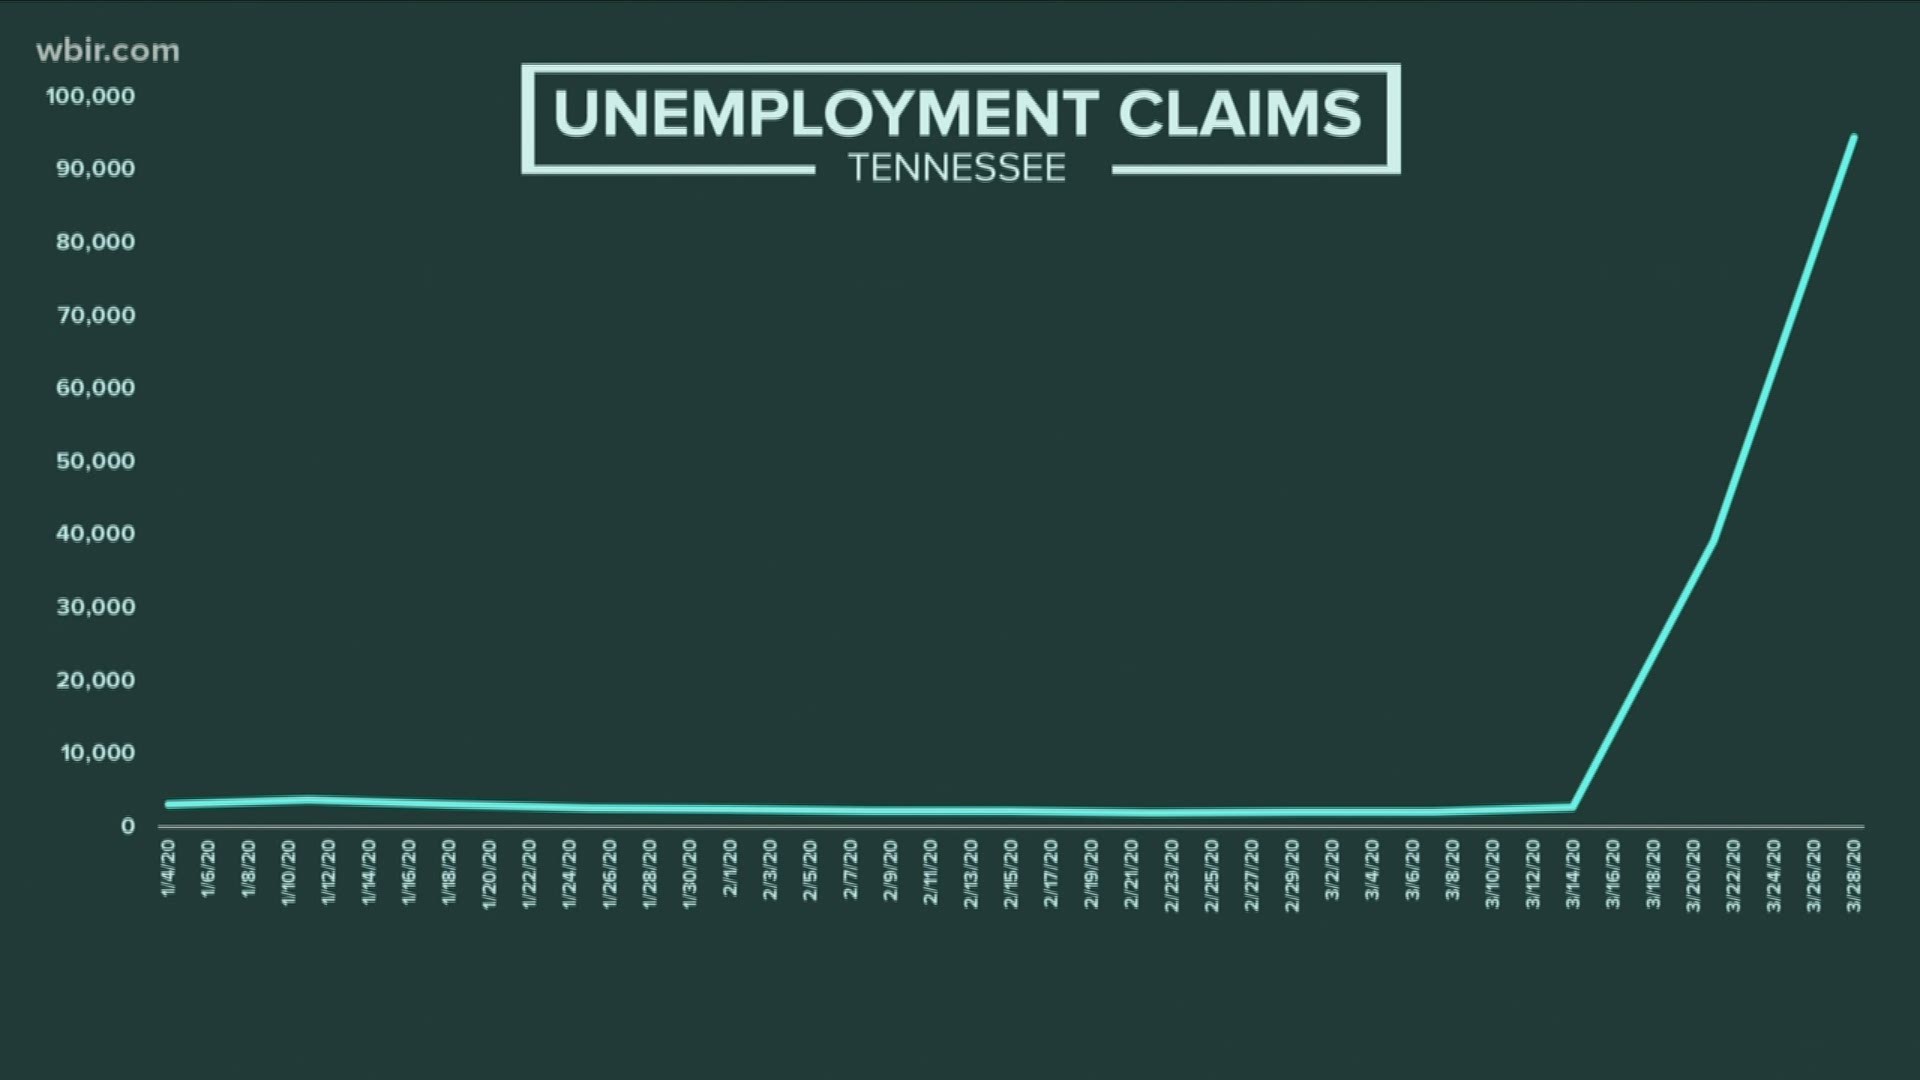 This past week - more than 94,000 people filed for unemployment. That's up from 39,000 the week before.